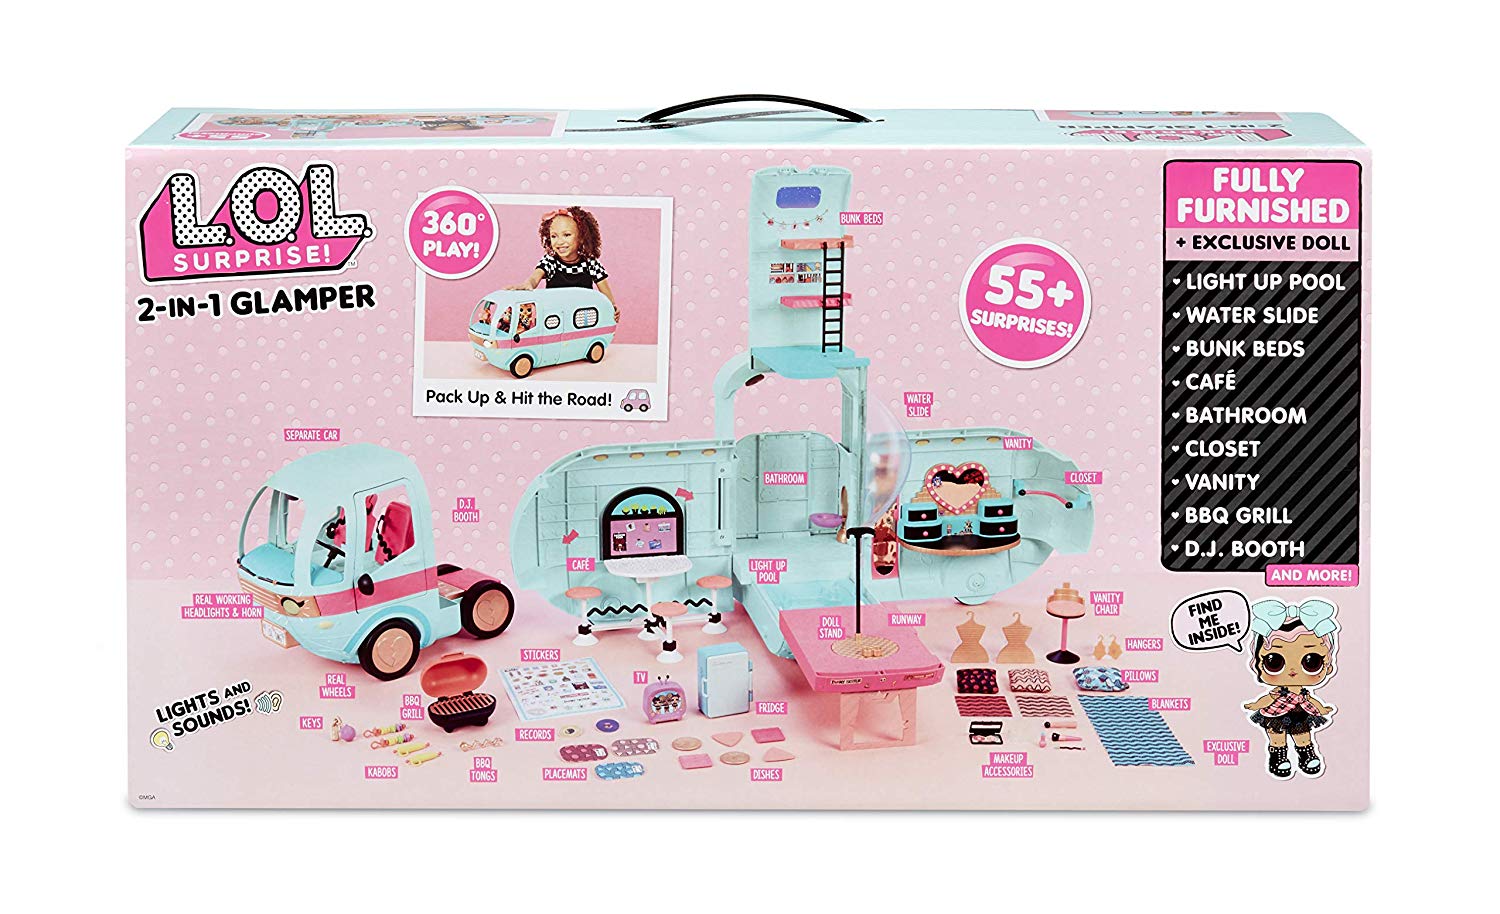 Surprises Fashion Camper Exclusive Doll Toy 2-in-1 Glamper LOL Surprise /& 55